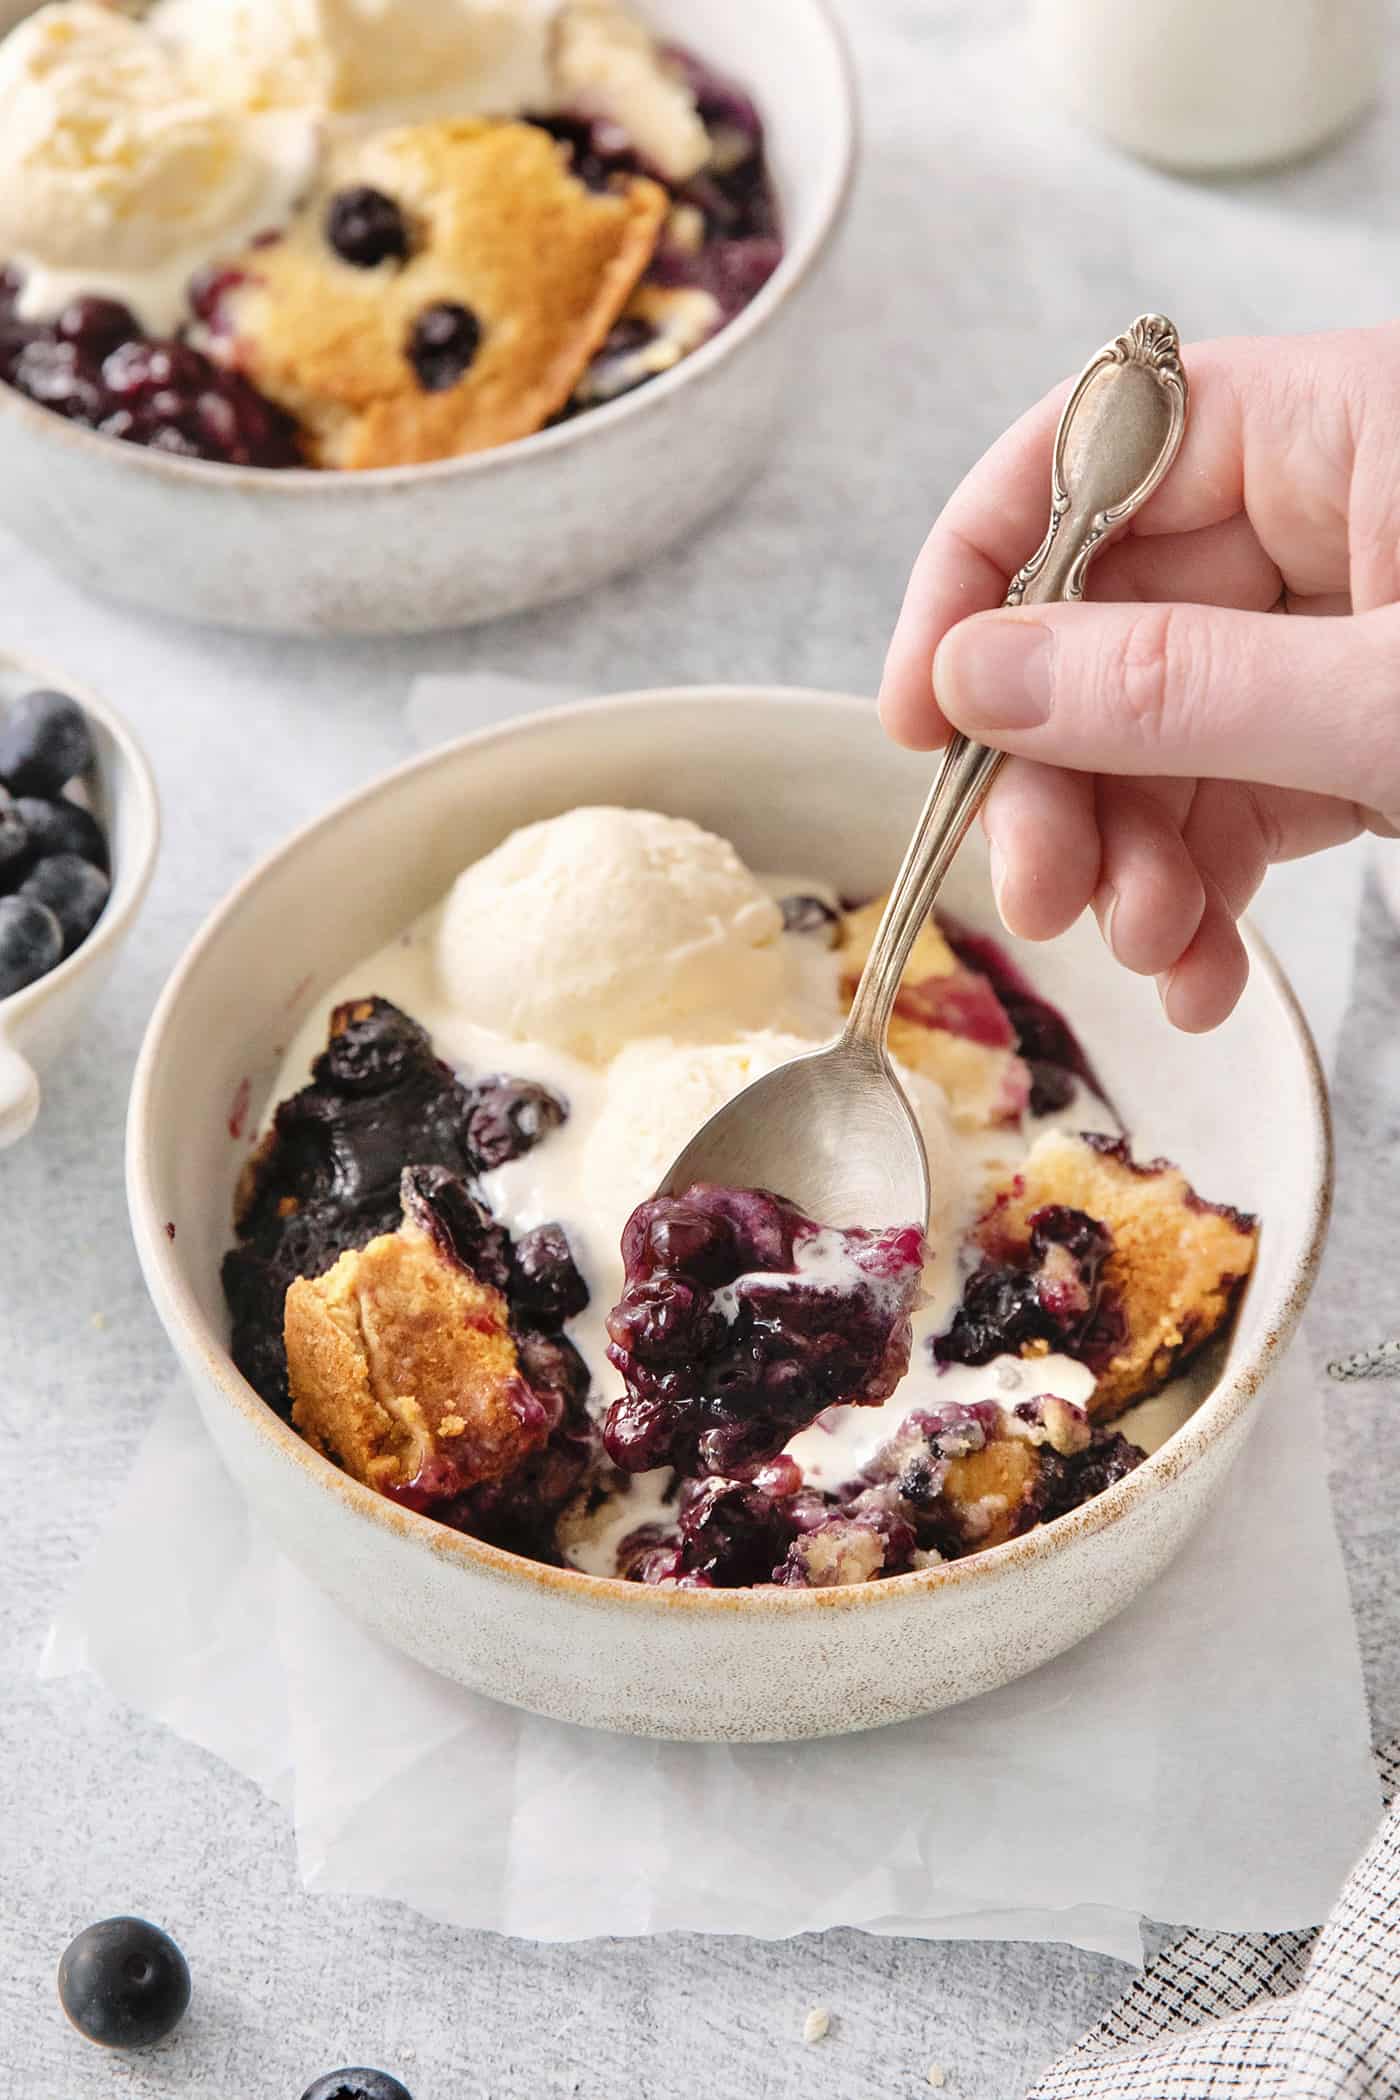 A hand holds a spoon dipping into a bowl of blueberry dump cake.